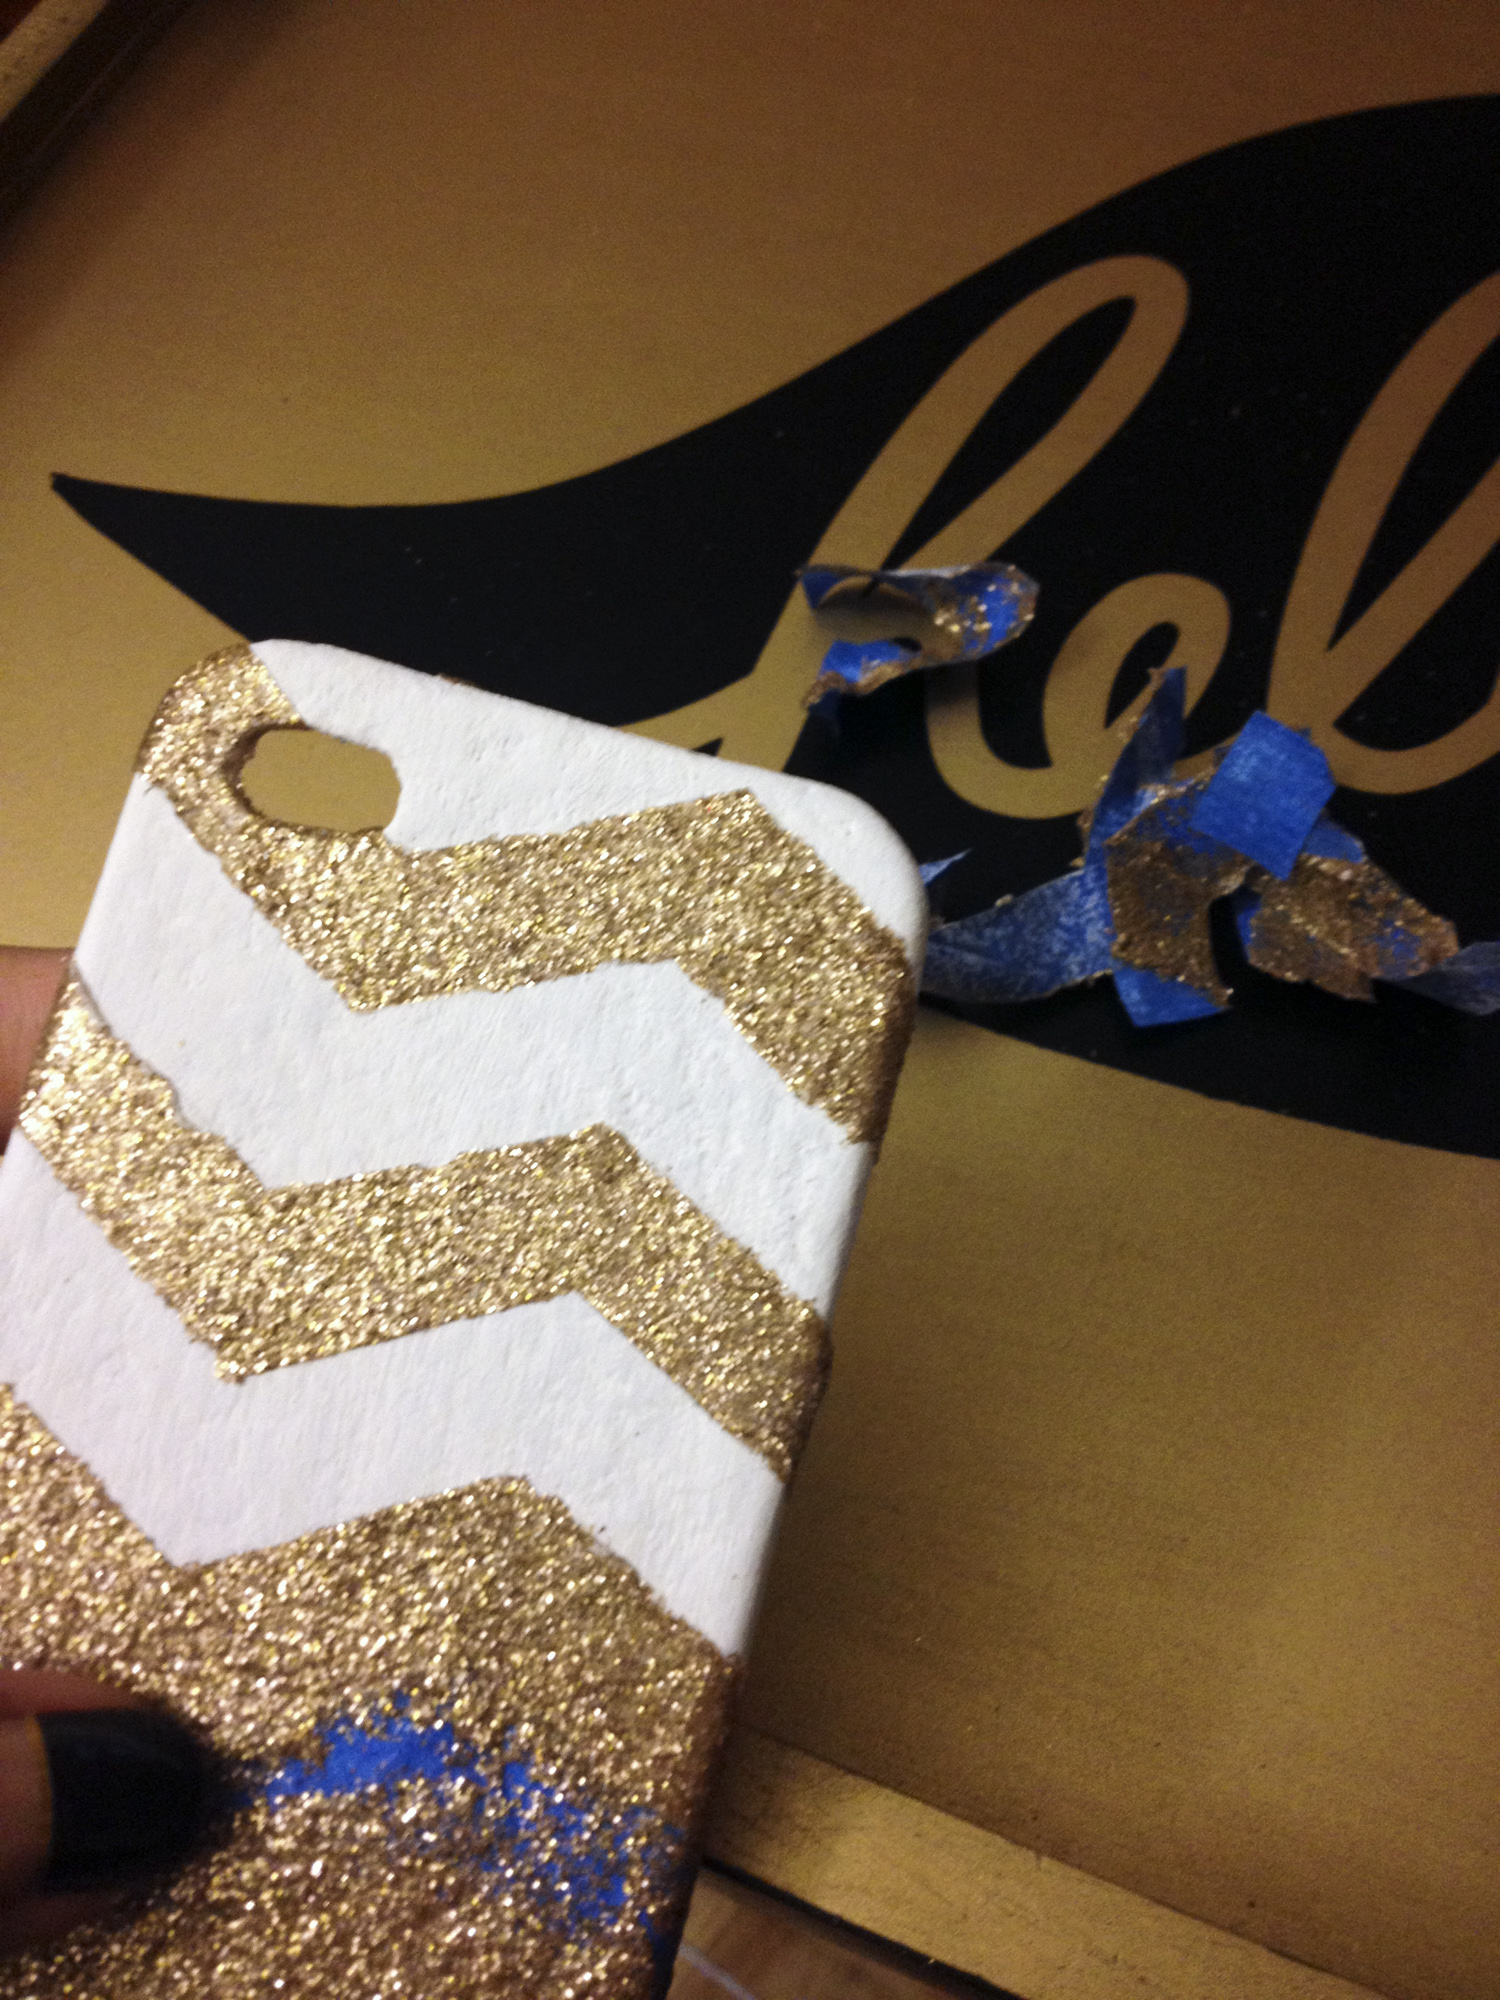 phone case makeover - peel off tape to reveal chevron pattern in glitter